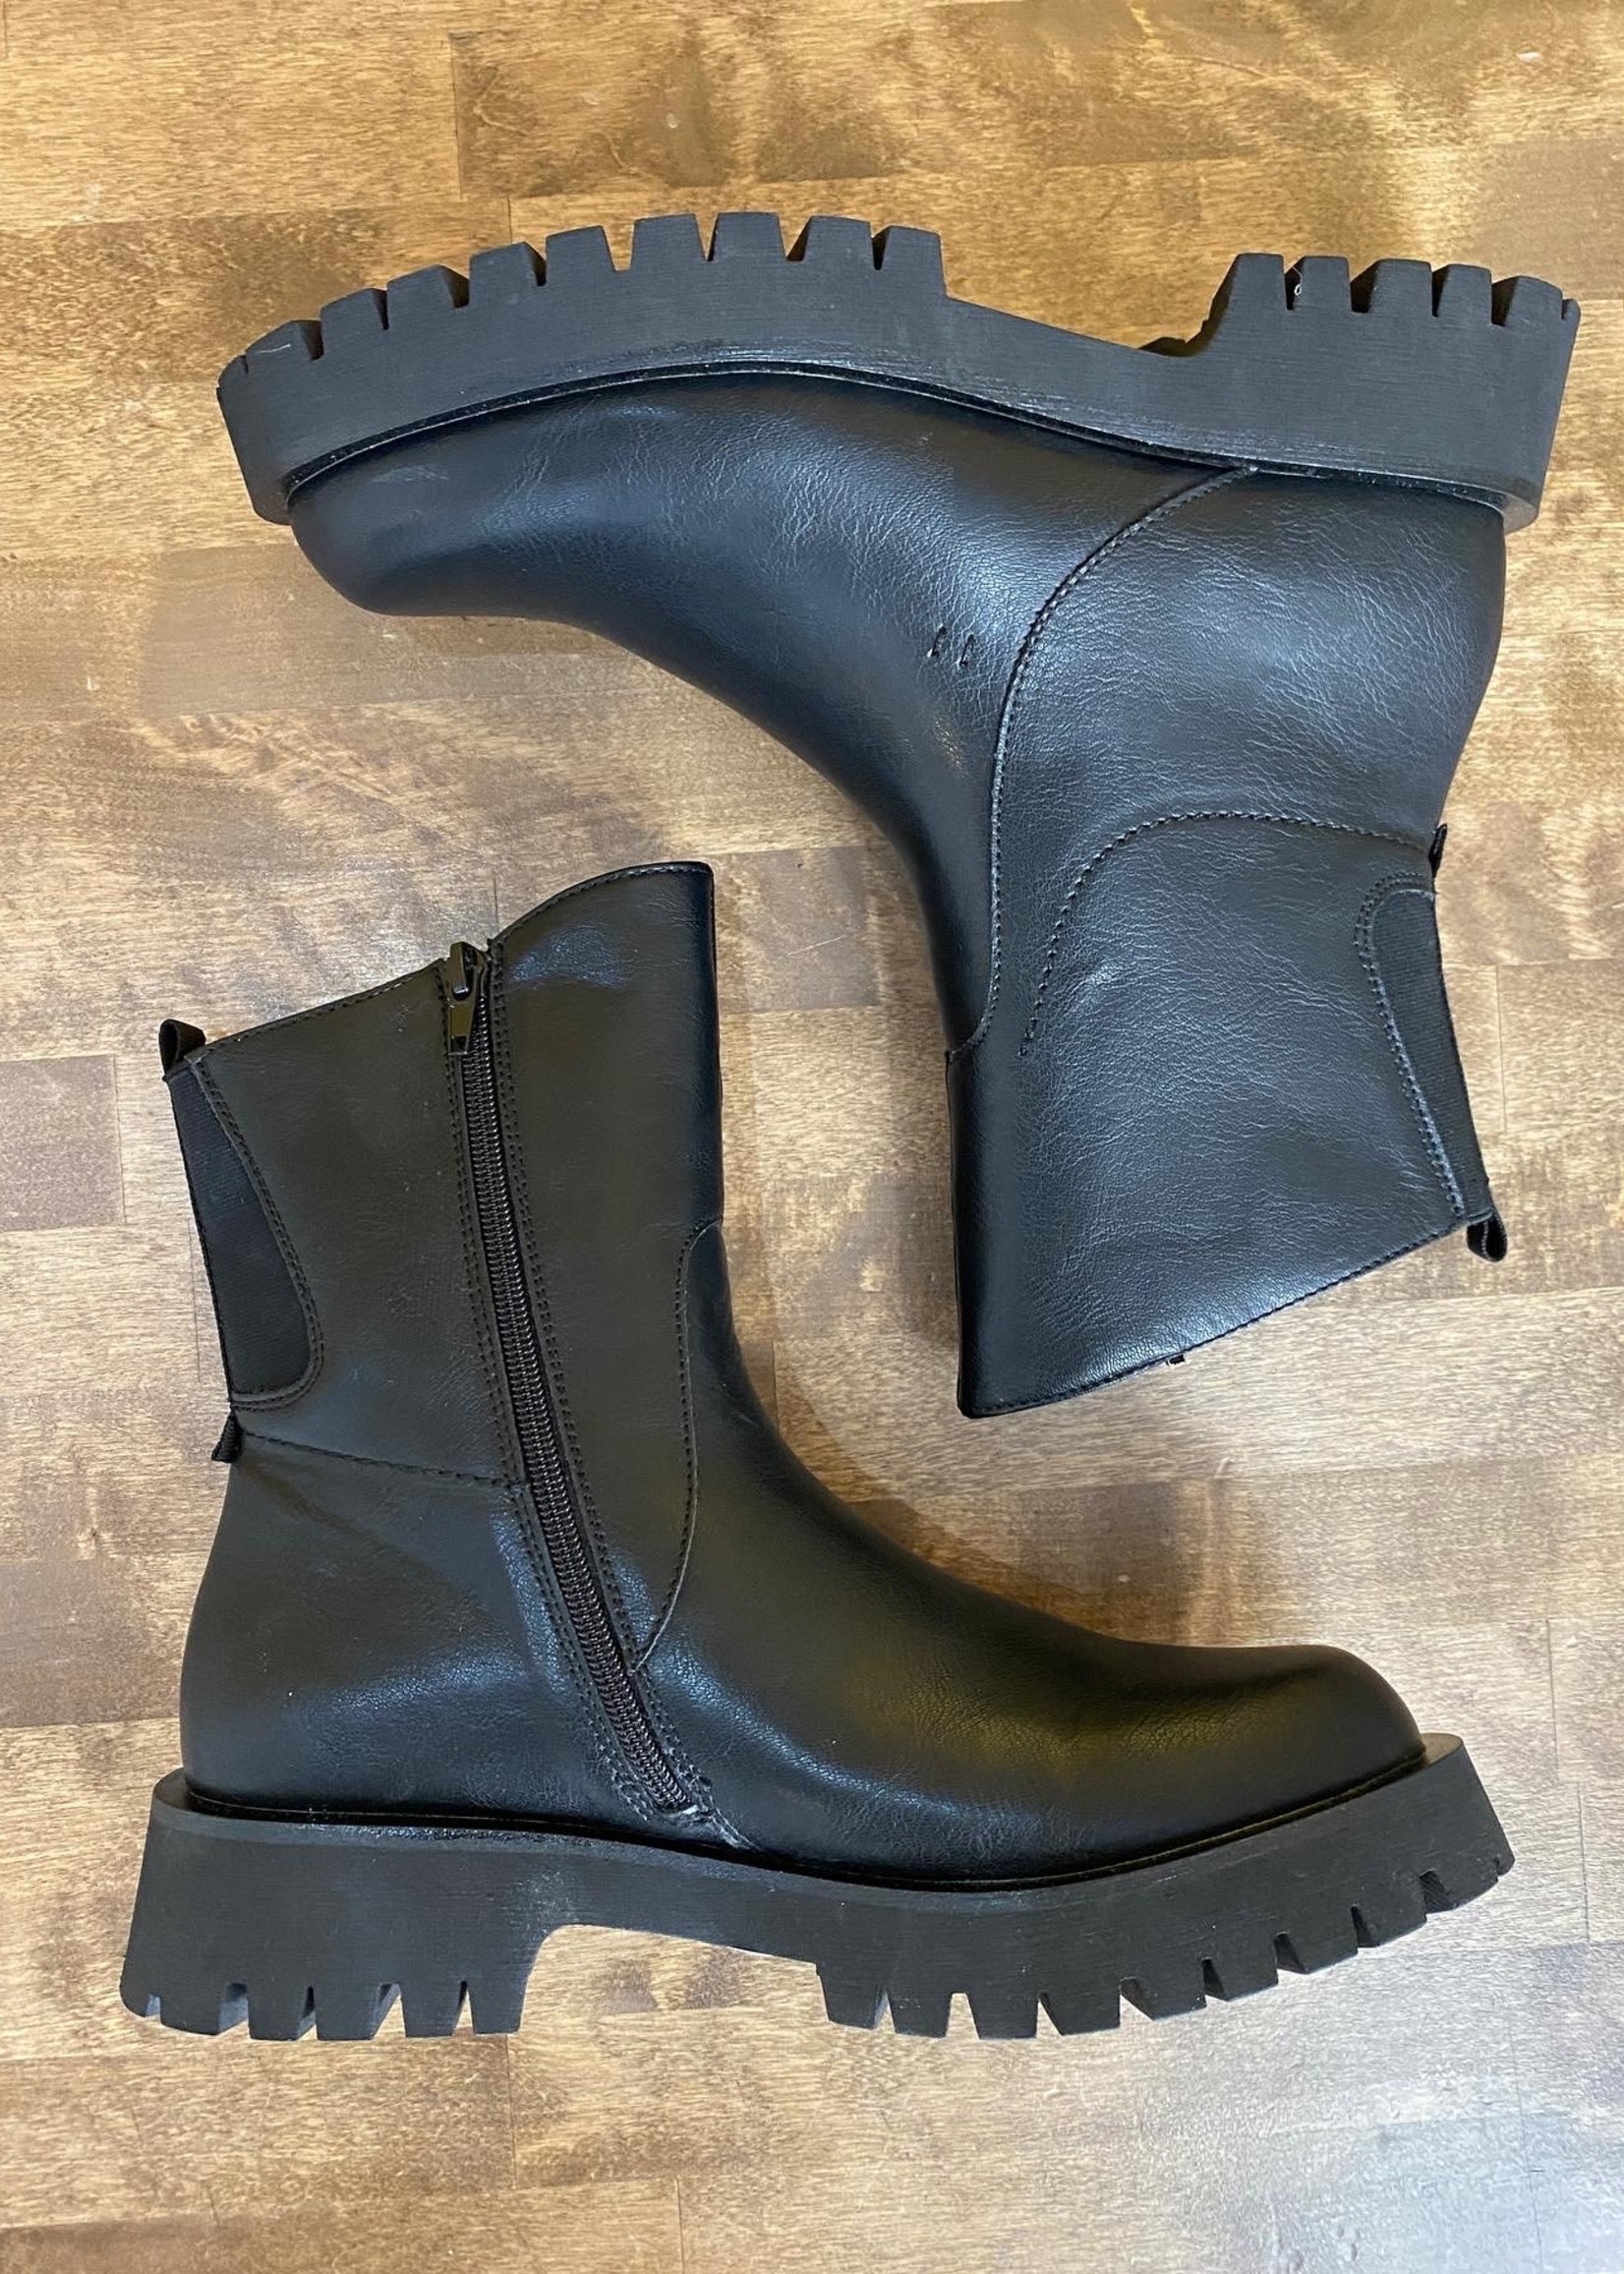 NWT ISOMEI Boots 9.5